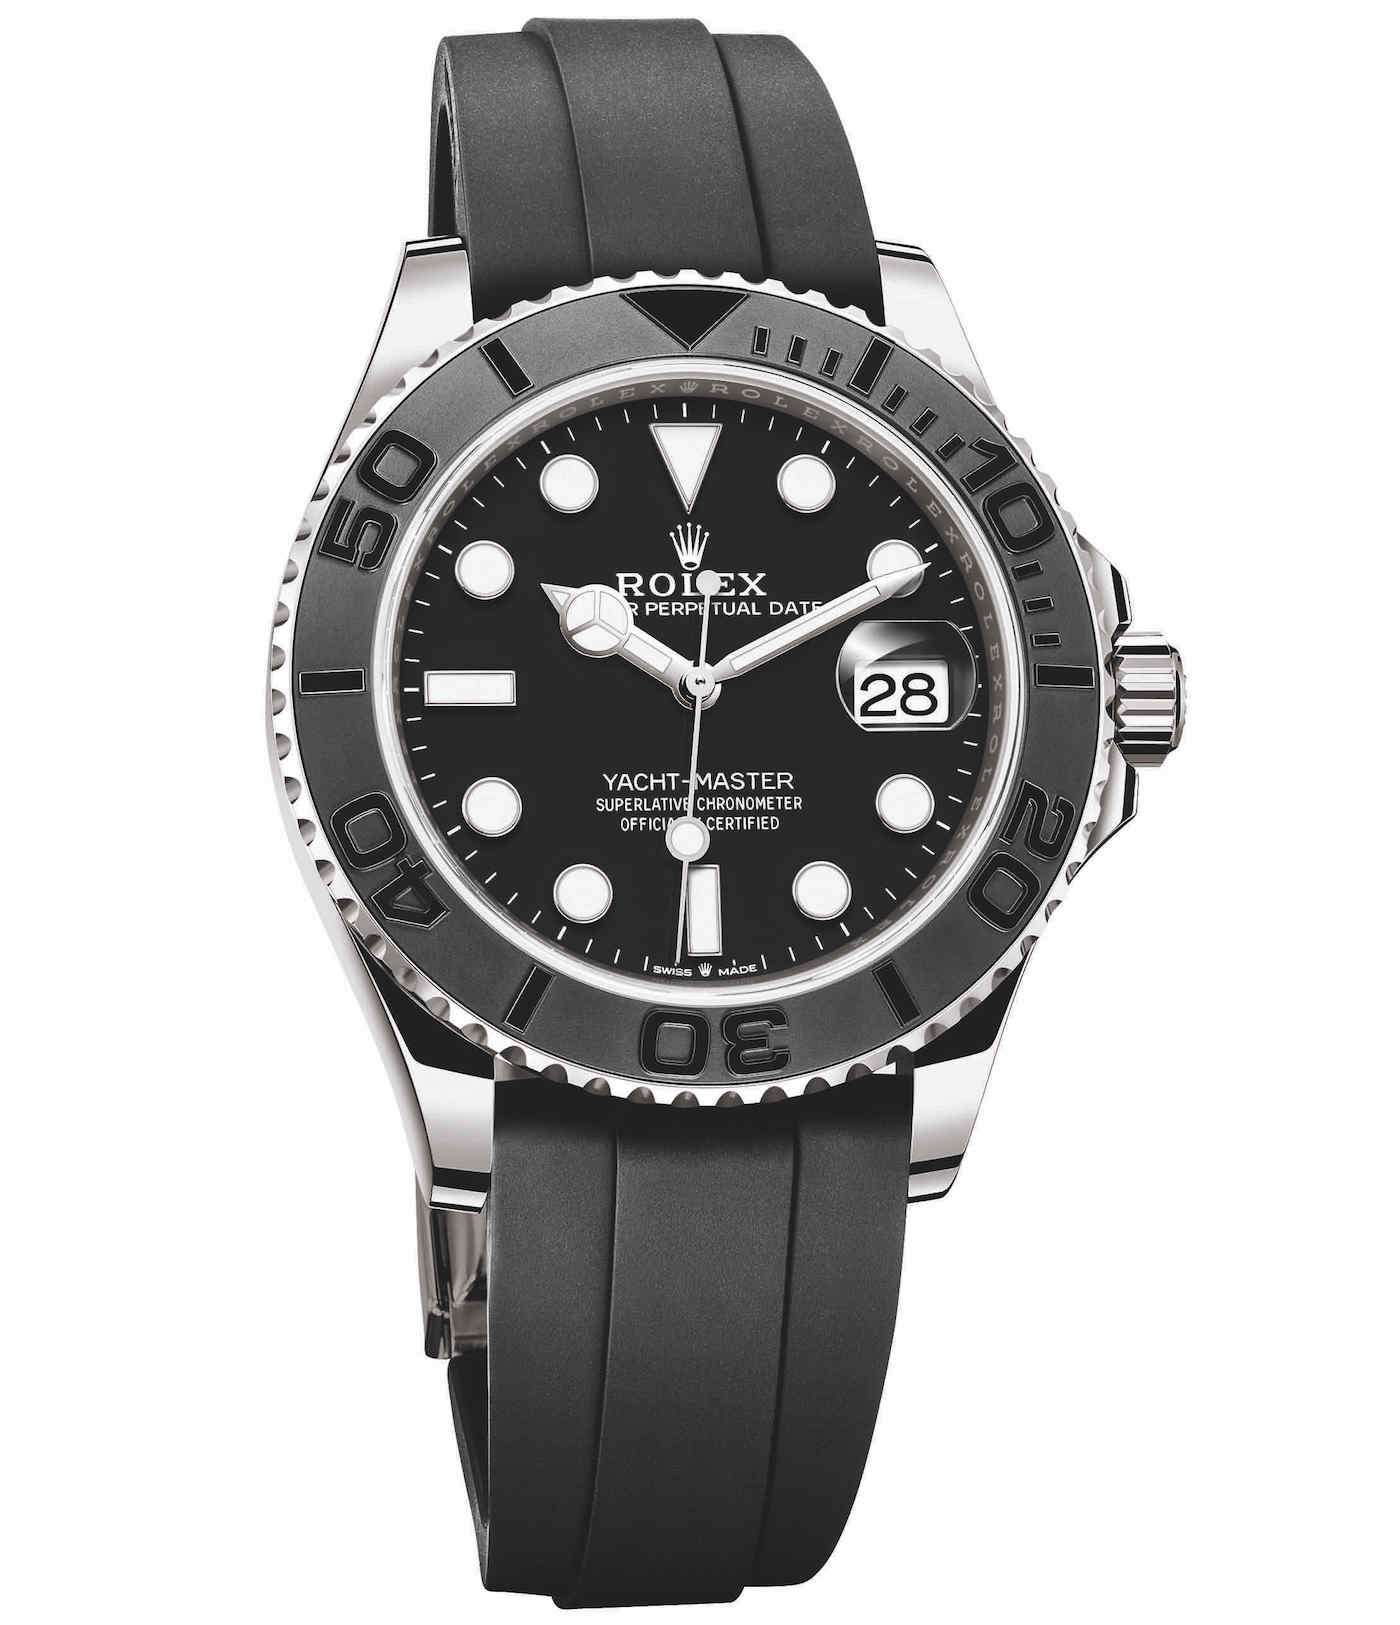 rolex yacht master superlative chronometer officially certified price